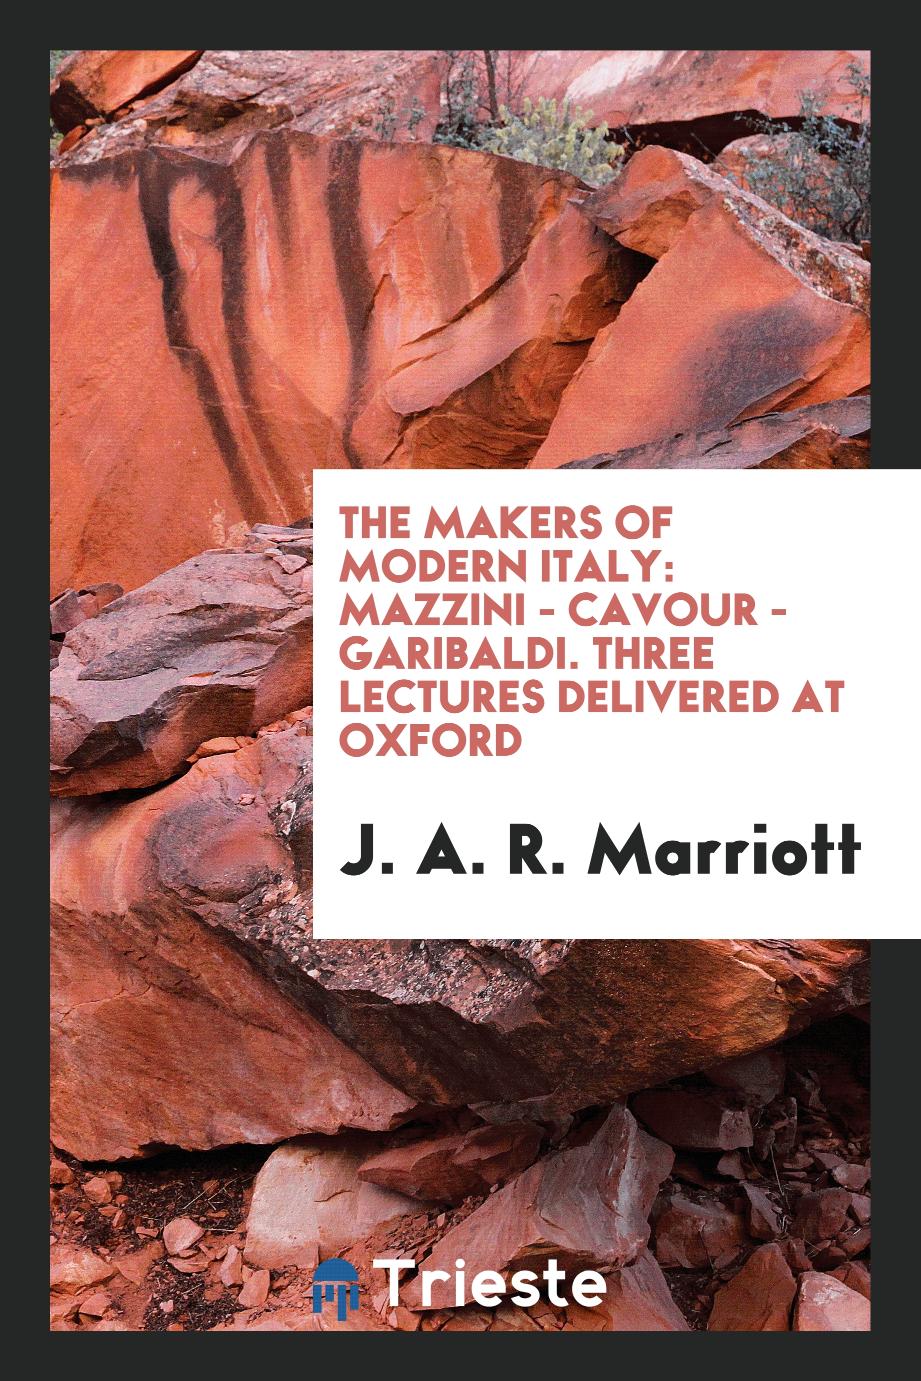 The Makers of Modern Italy: Mazzini - Cavour - Garibaldi. Three Lectures Delivered at Oxford